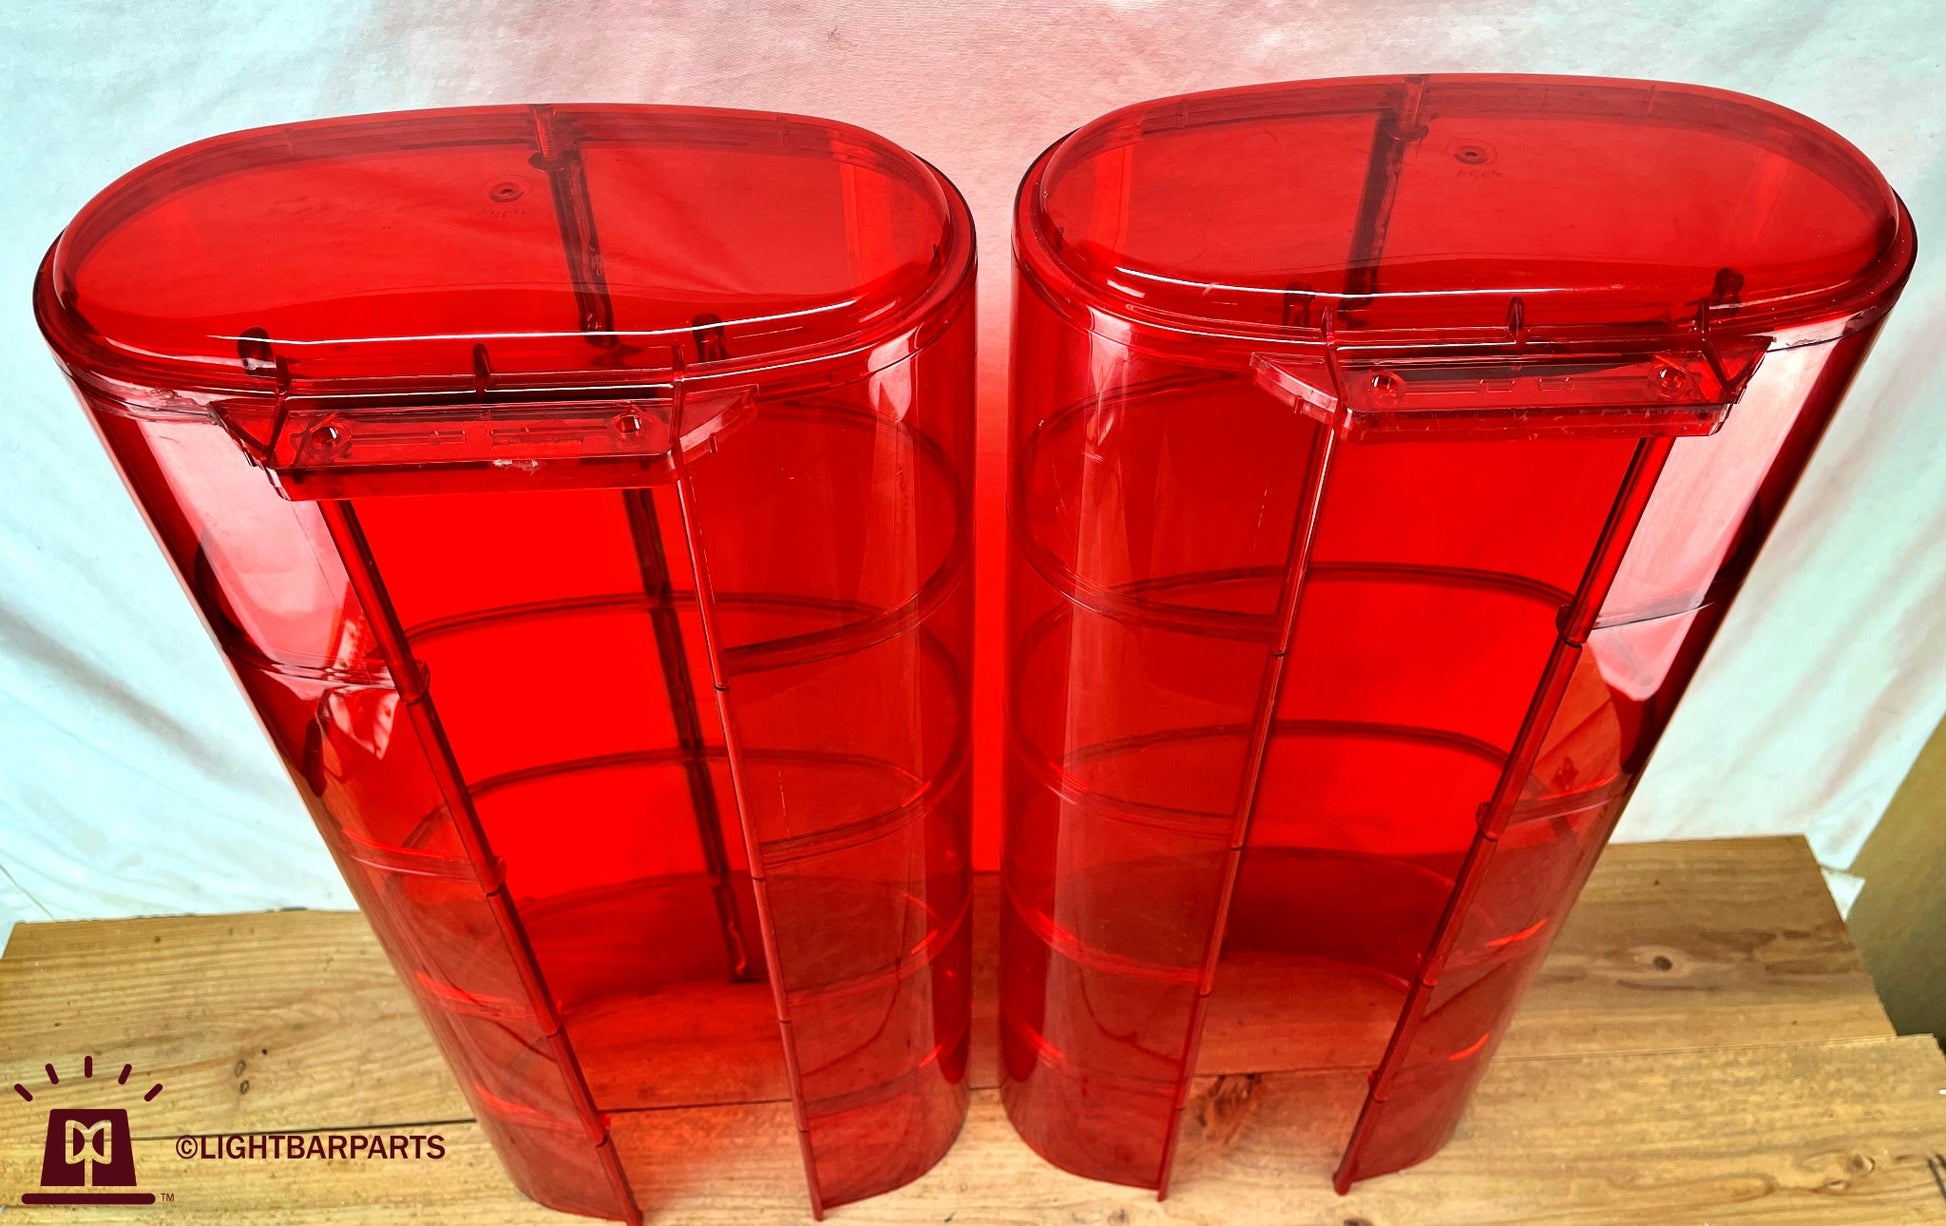 Federal Signal Aerodynic Lightbar - Pair of 5 Panel Red Domes with Red End Caps